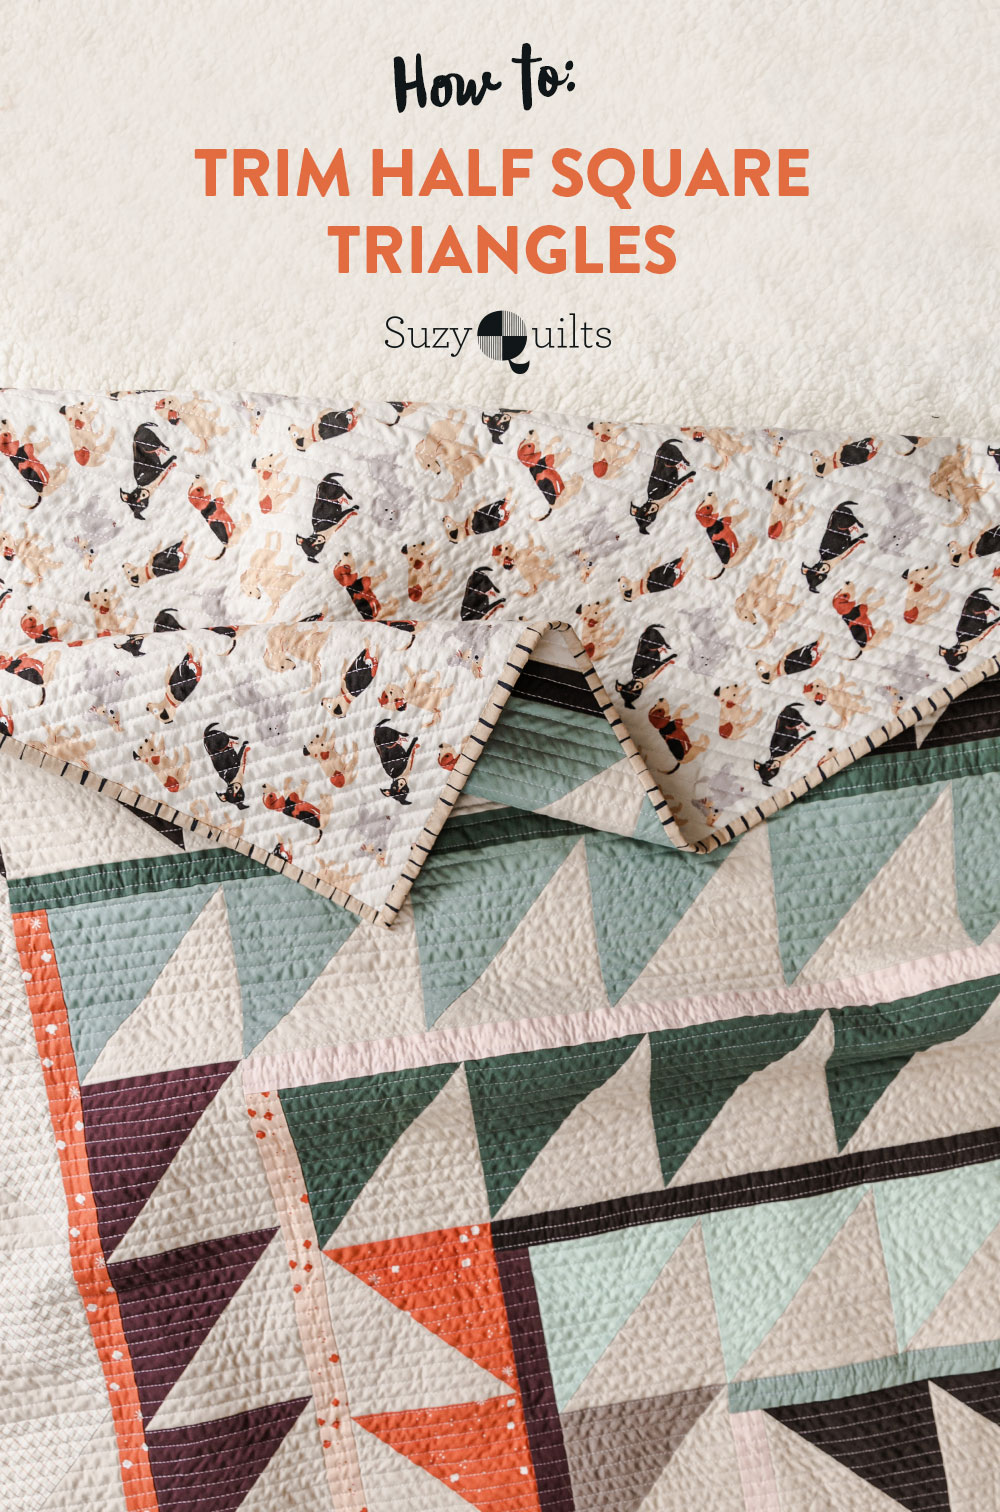 The best tutorial on how to trim half square triangles for quilting! Make perfect HSTs every time with this sewing method. suzyquilts.com #quilting #hst